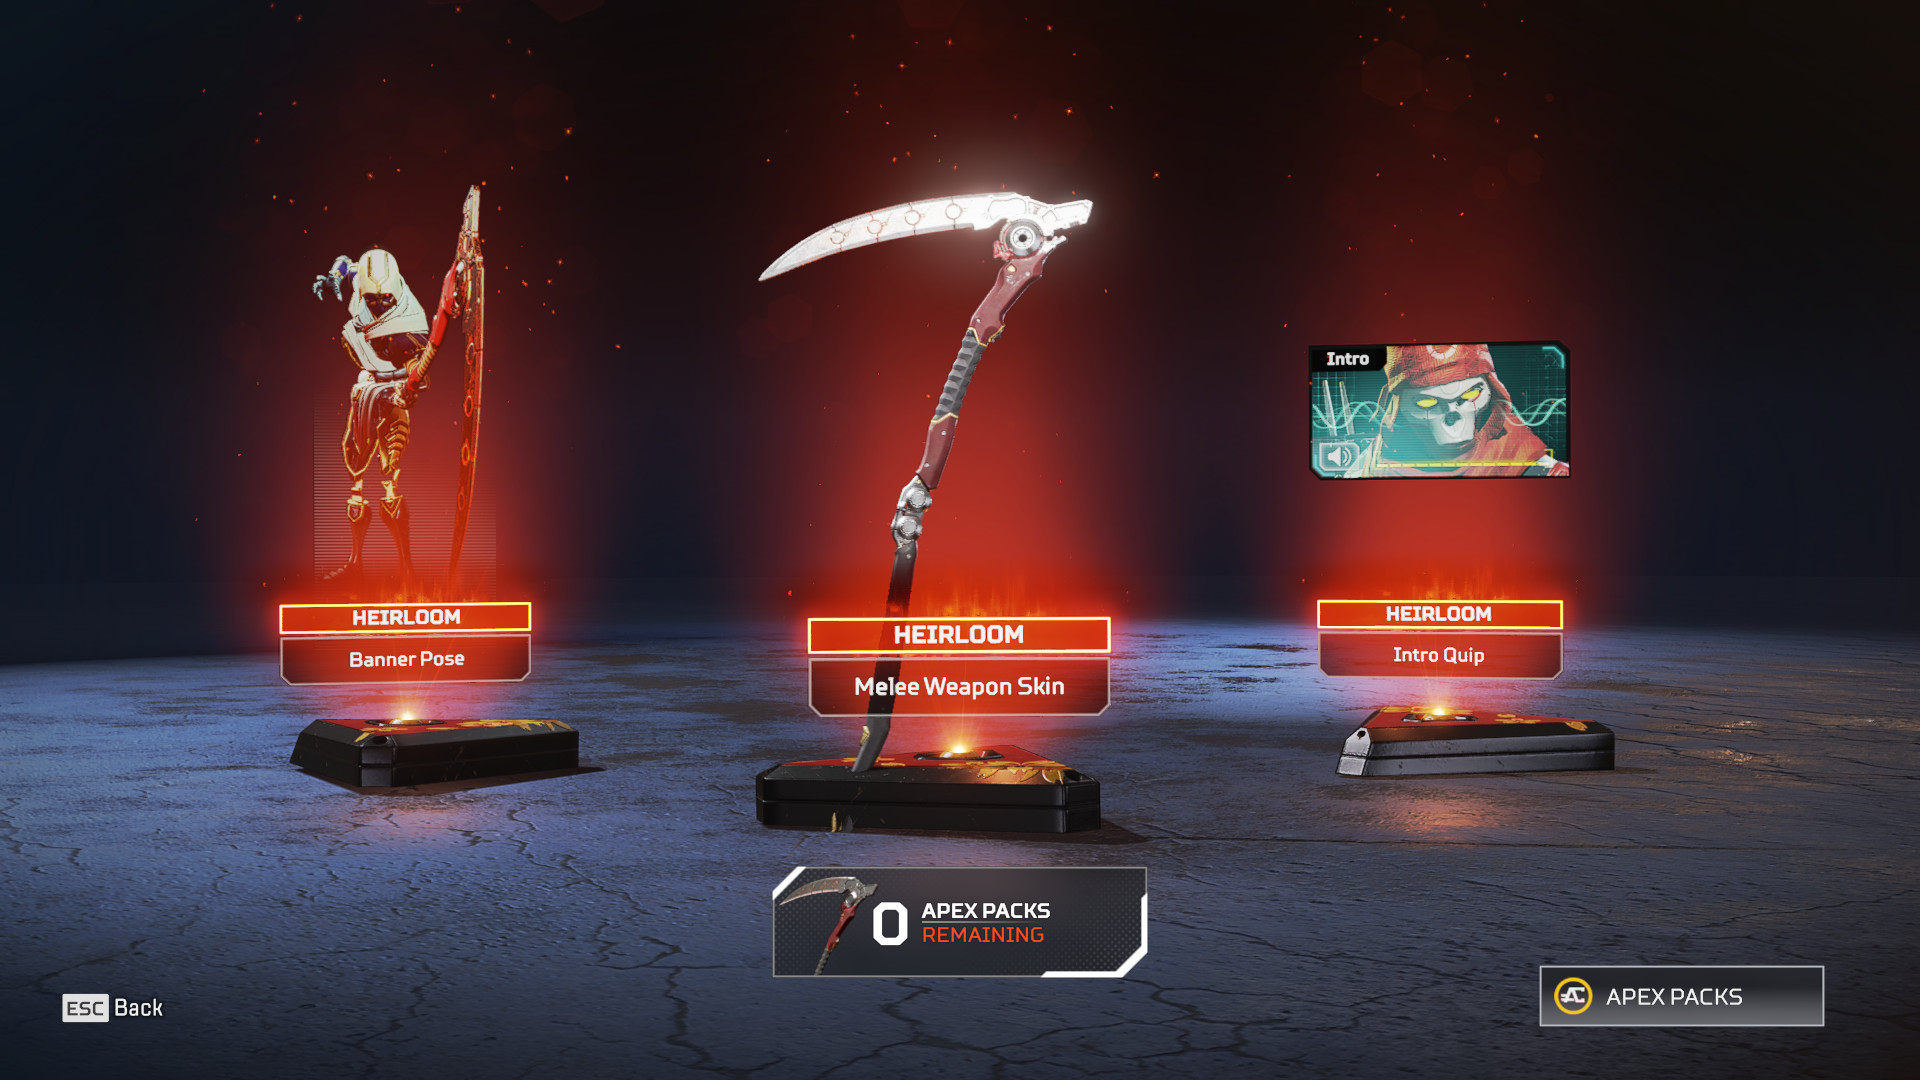 Apex Legends Heirlooms: A Revenant quip, sickle melee weapon skin, and banner pose in the Apex Pack loot screen.